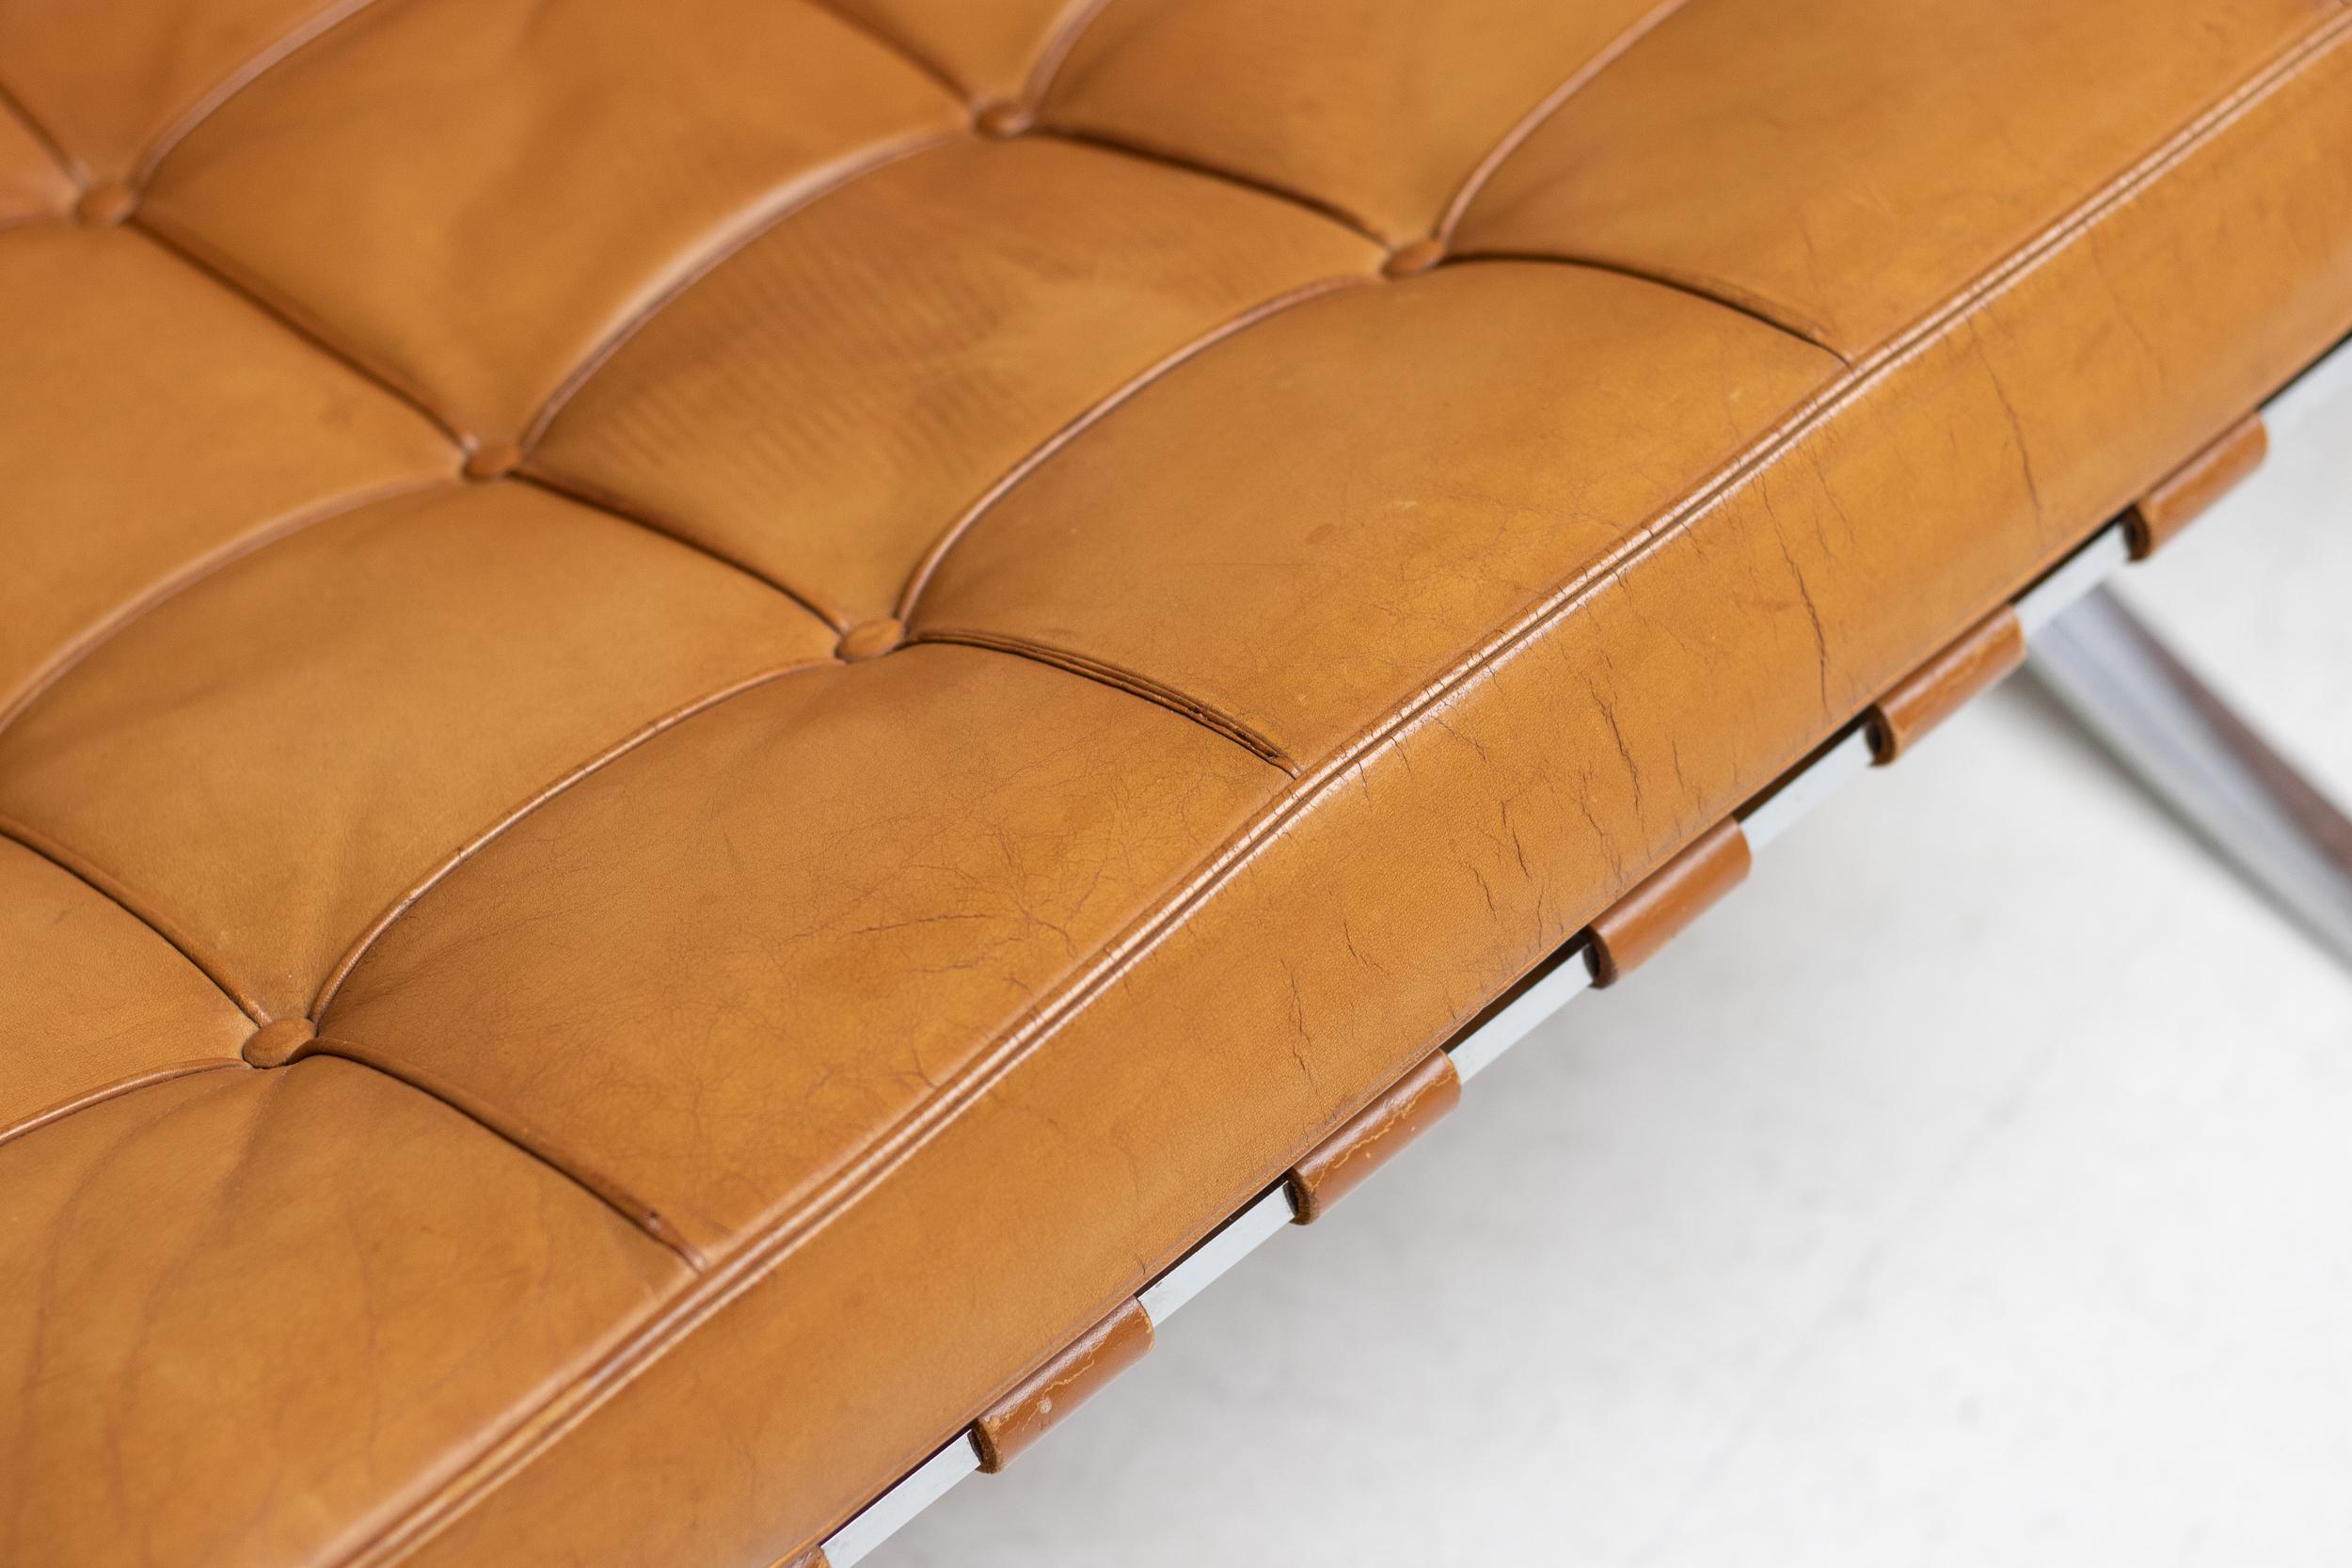 Exceptional split frame matching pair of Barcelona chairs by Mies Van der Rohe for Knoll International in the most desirable natural cognac leather. Wonderful all original condition with some wear and creasing to the leather as one would expect from